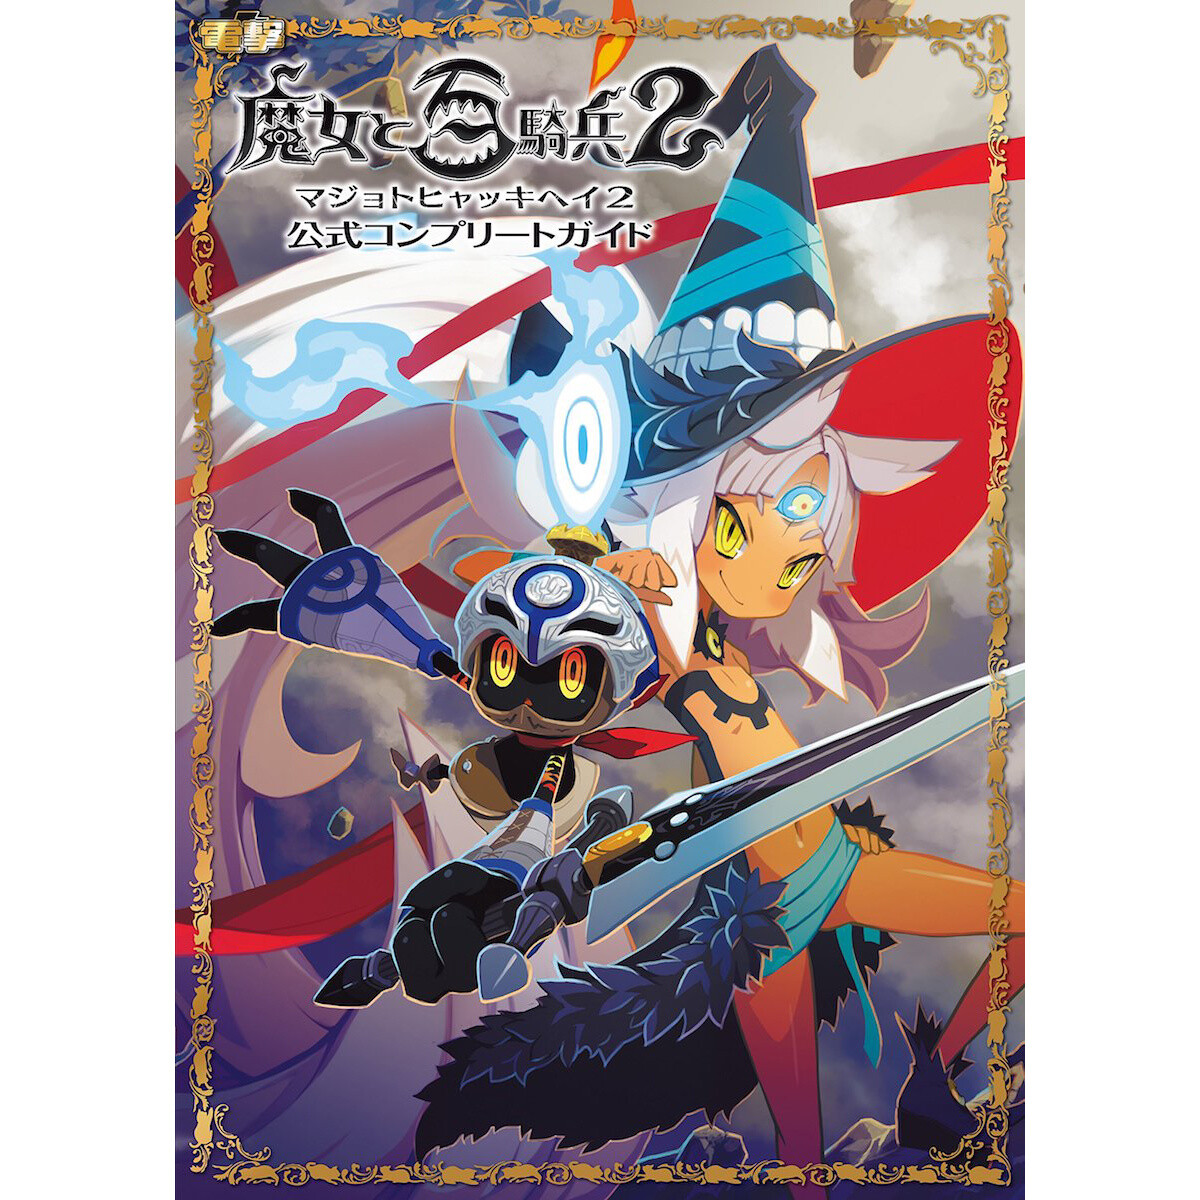 the-witch-and-the-hundred-knight-2-complete-guide-tokyo-otaku-mode-tom